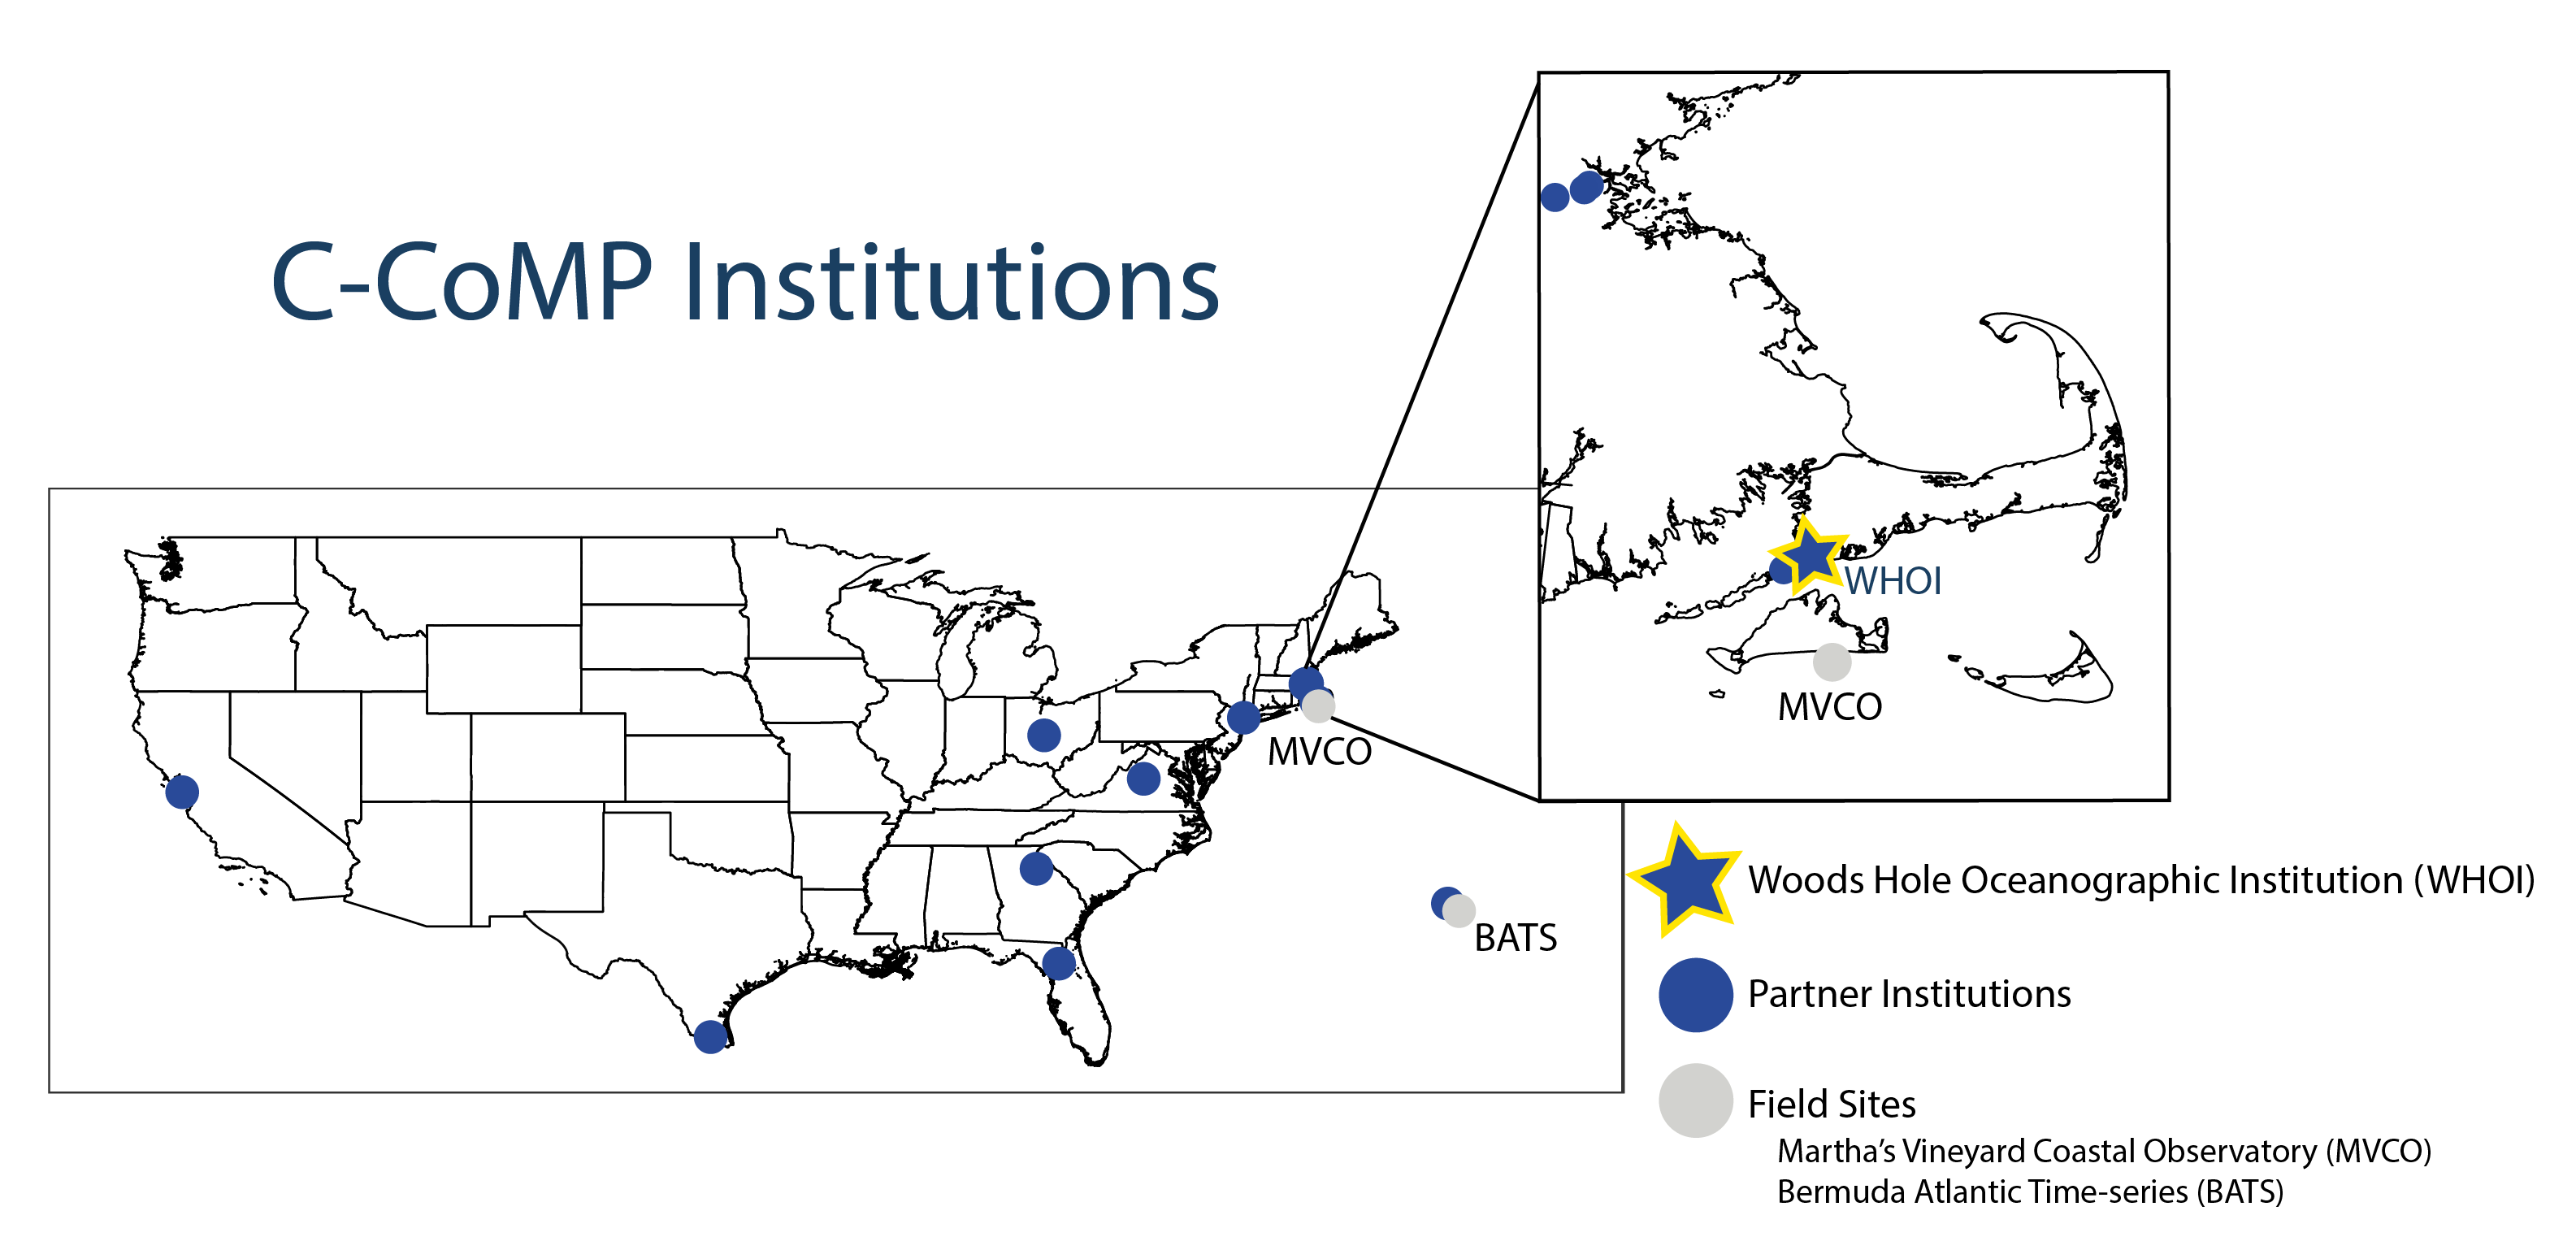 C-CoMP Institutions are depicted in the map above.